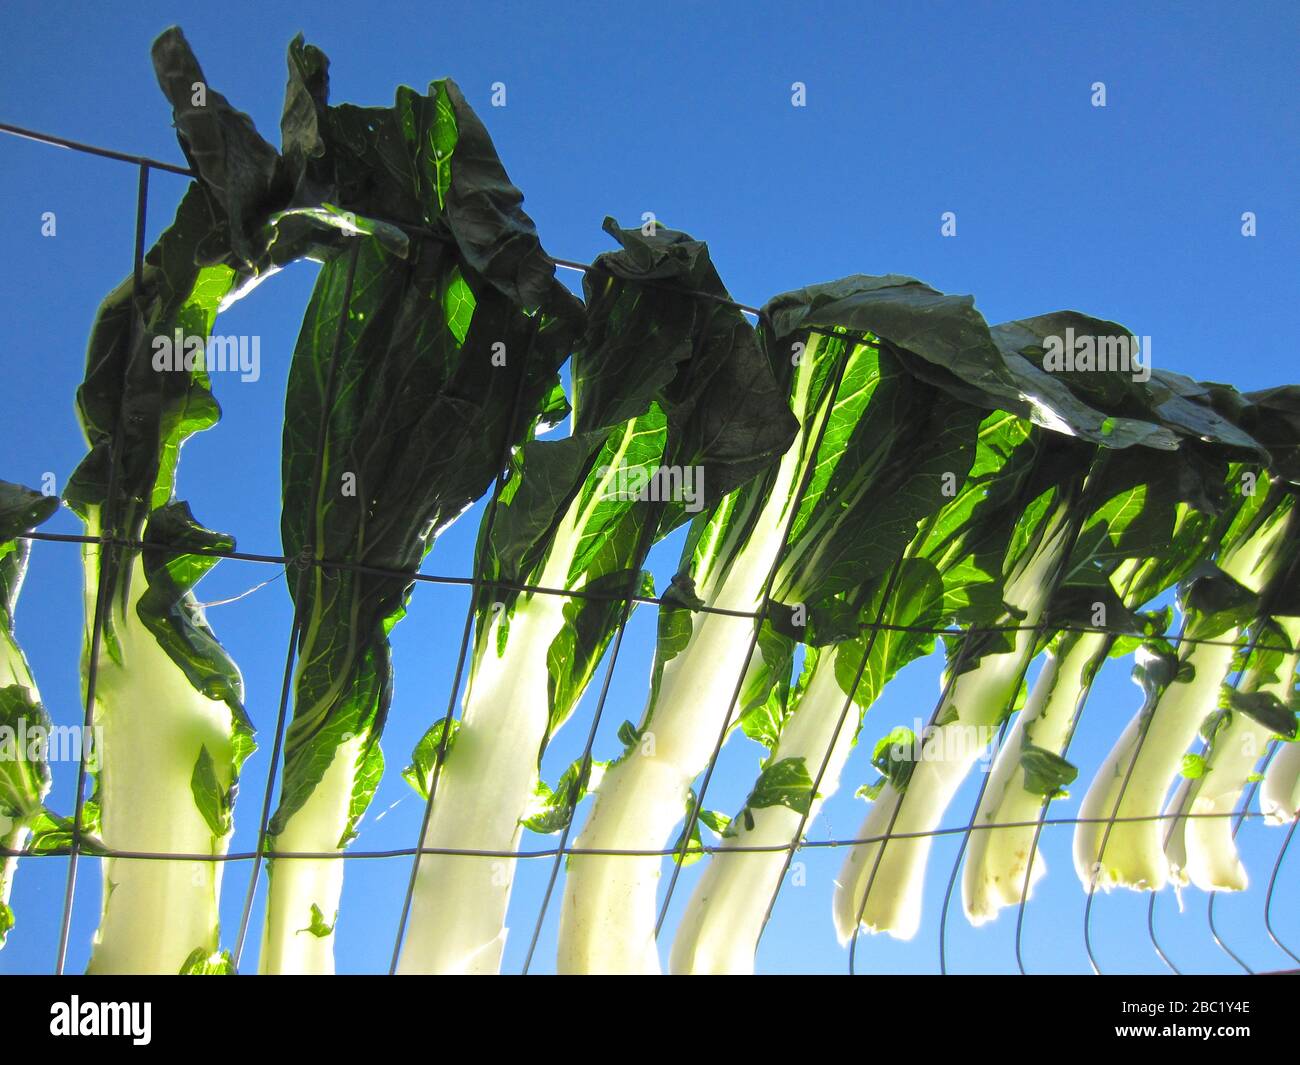 Organic Bok Choy ( Chinese vegetable ) sun-drying on the chicken wire mesh, part of urban gardening project, seen on a sunny summer day Stock Photo